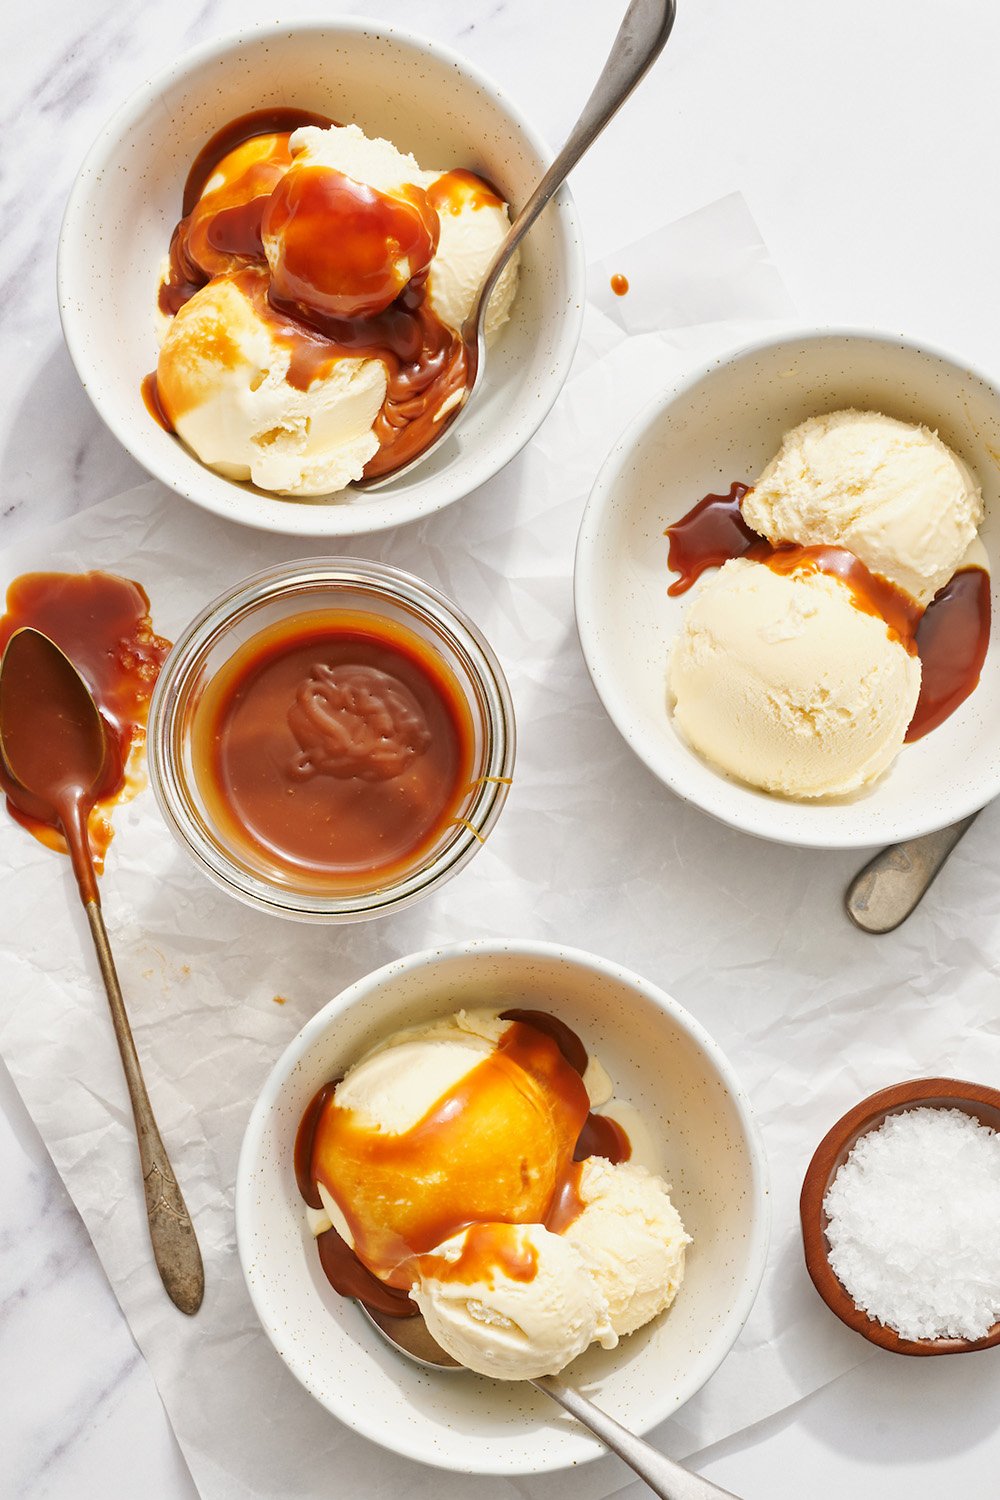 salted caramel sauce being drizzled over bowls of vanilla ice cream in bowls.